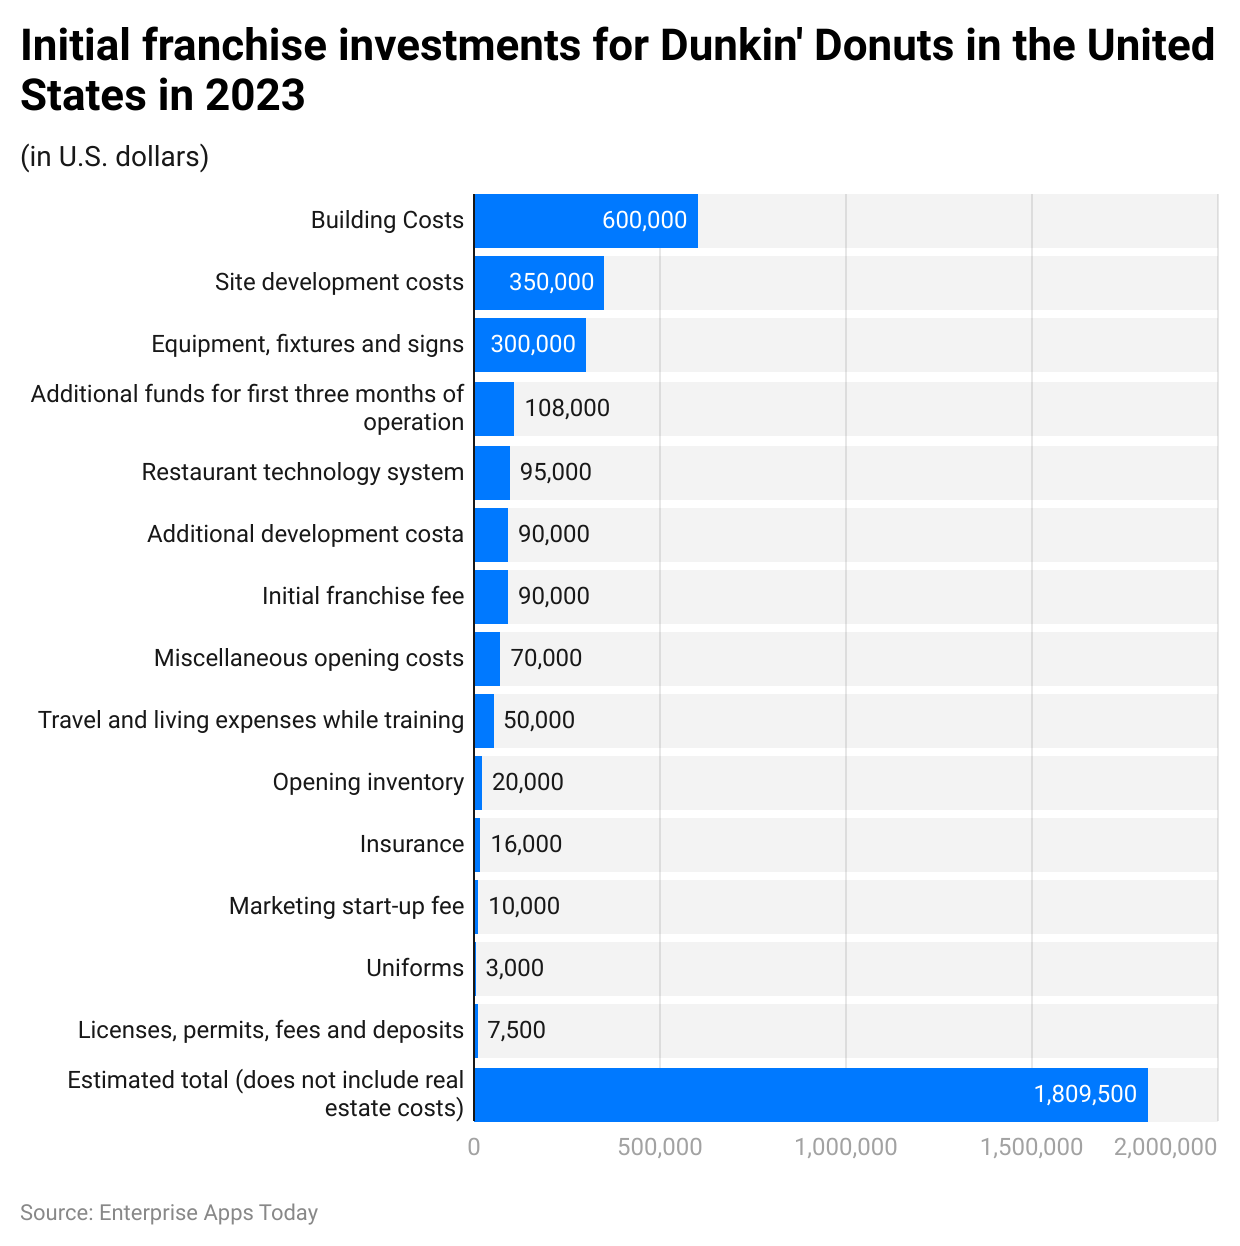 initial-franchise-investments-for-dunkin-donuts-in-the-united-states-in-2023